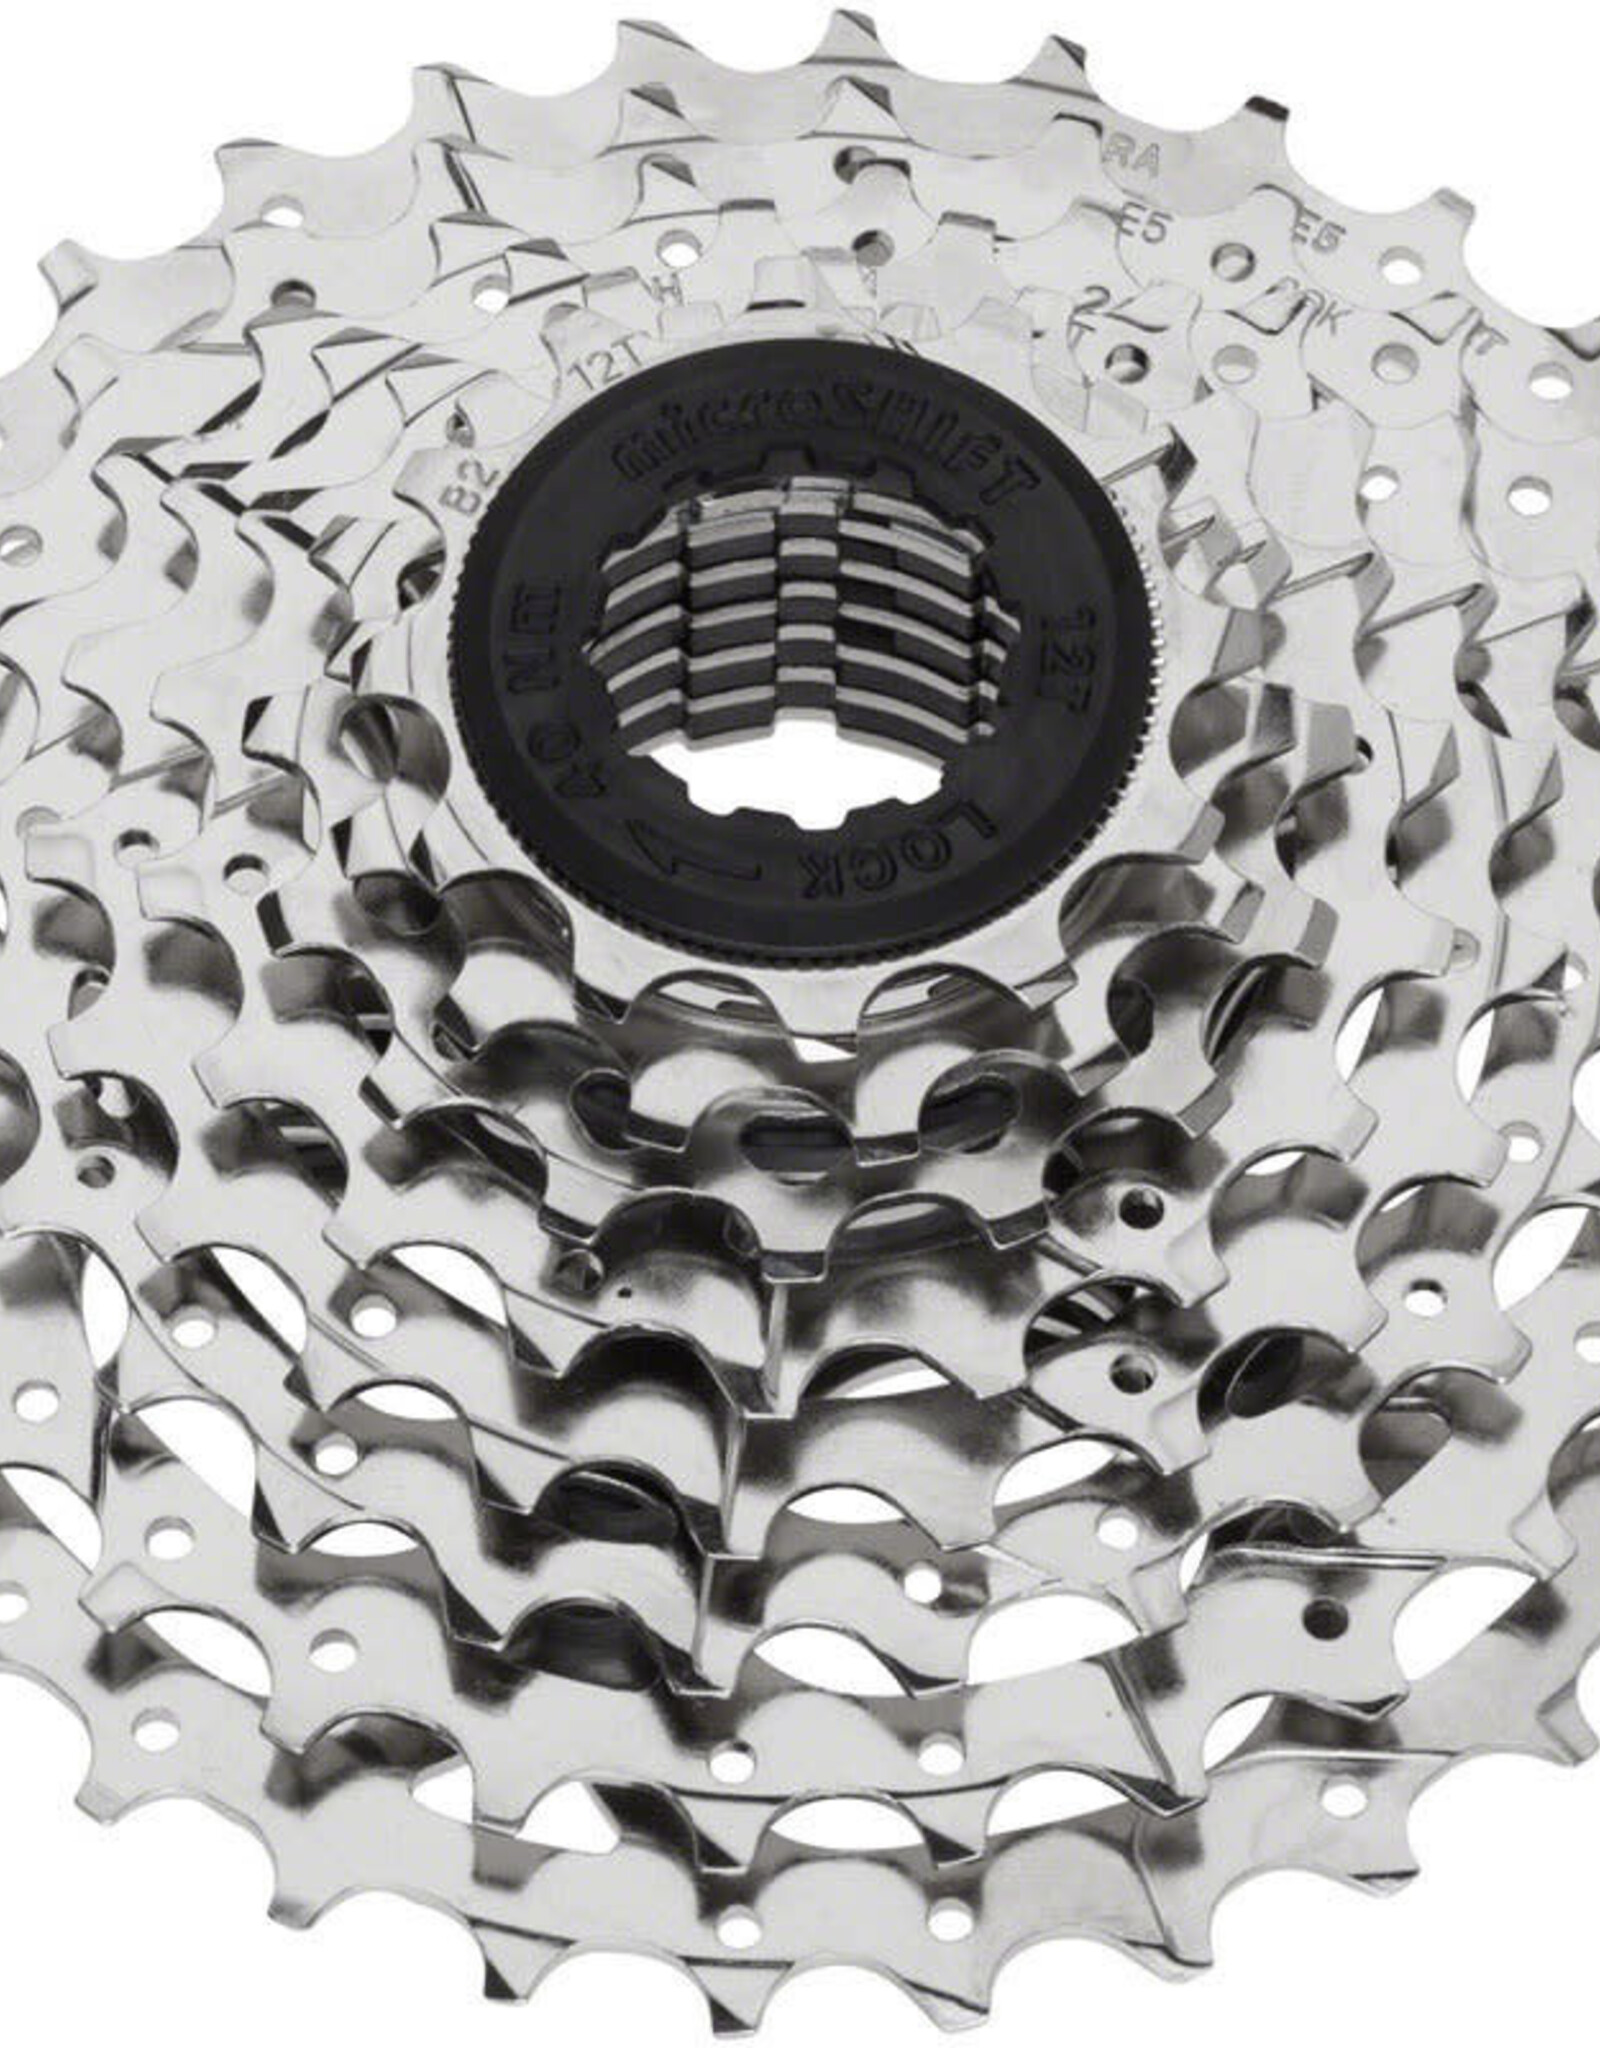 microSHIFT H08 Cassette - 8 Speed, 11-34t, Silver, Nickel Plated